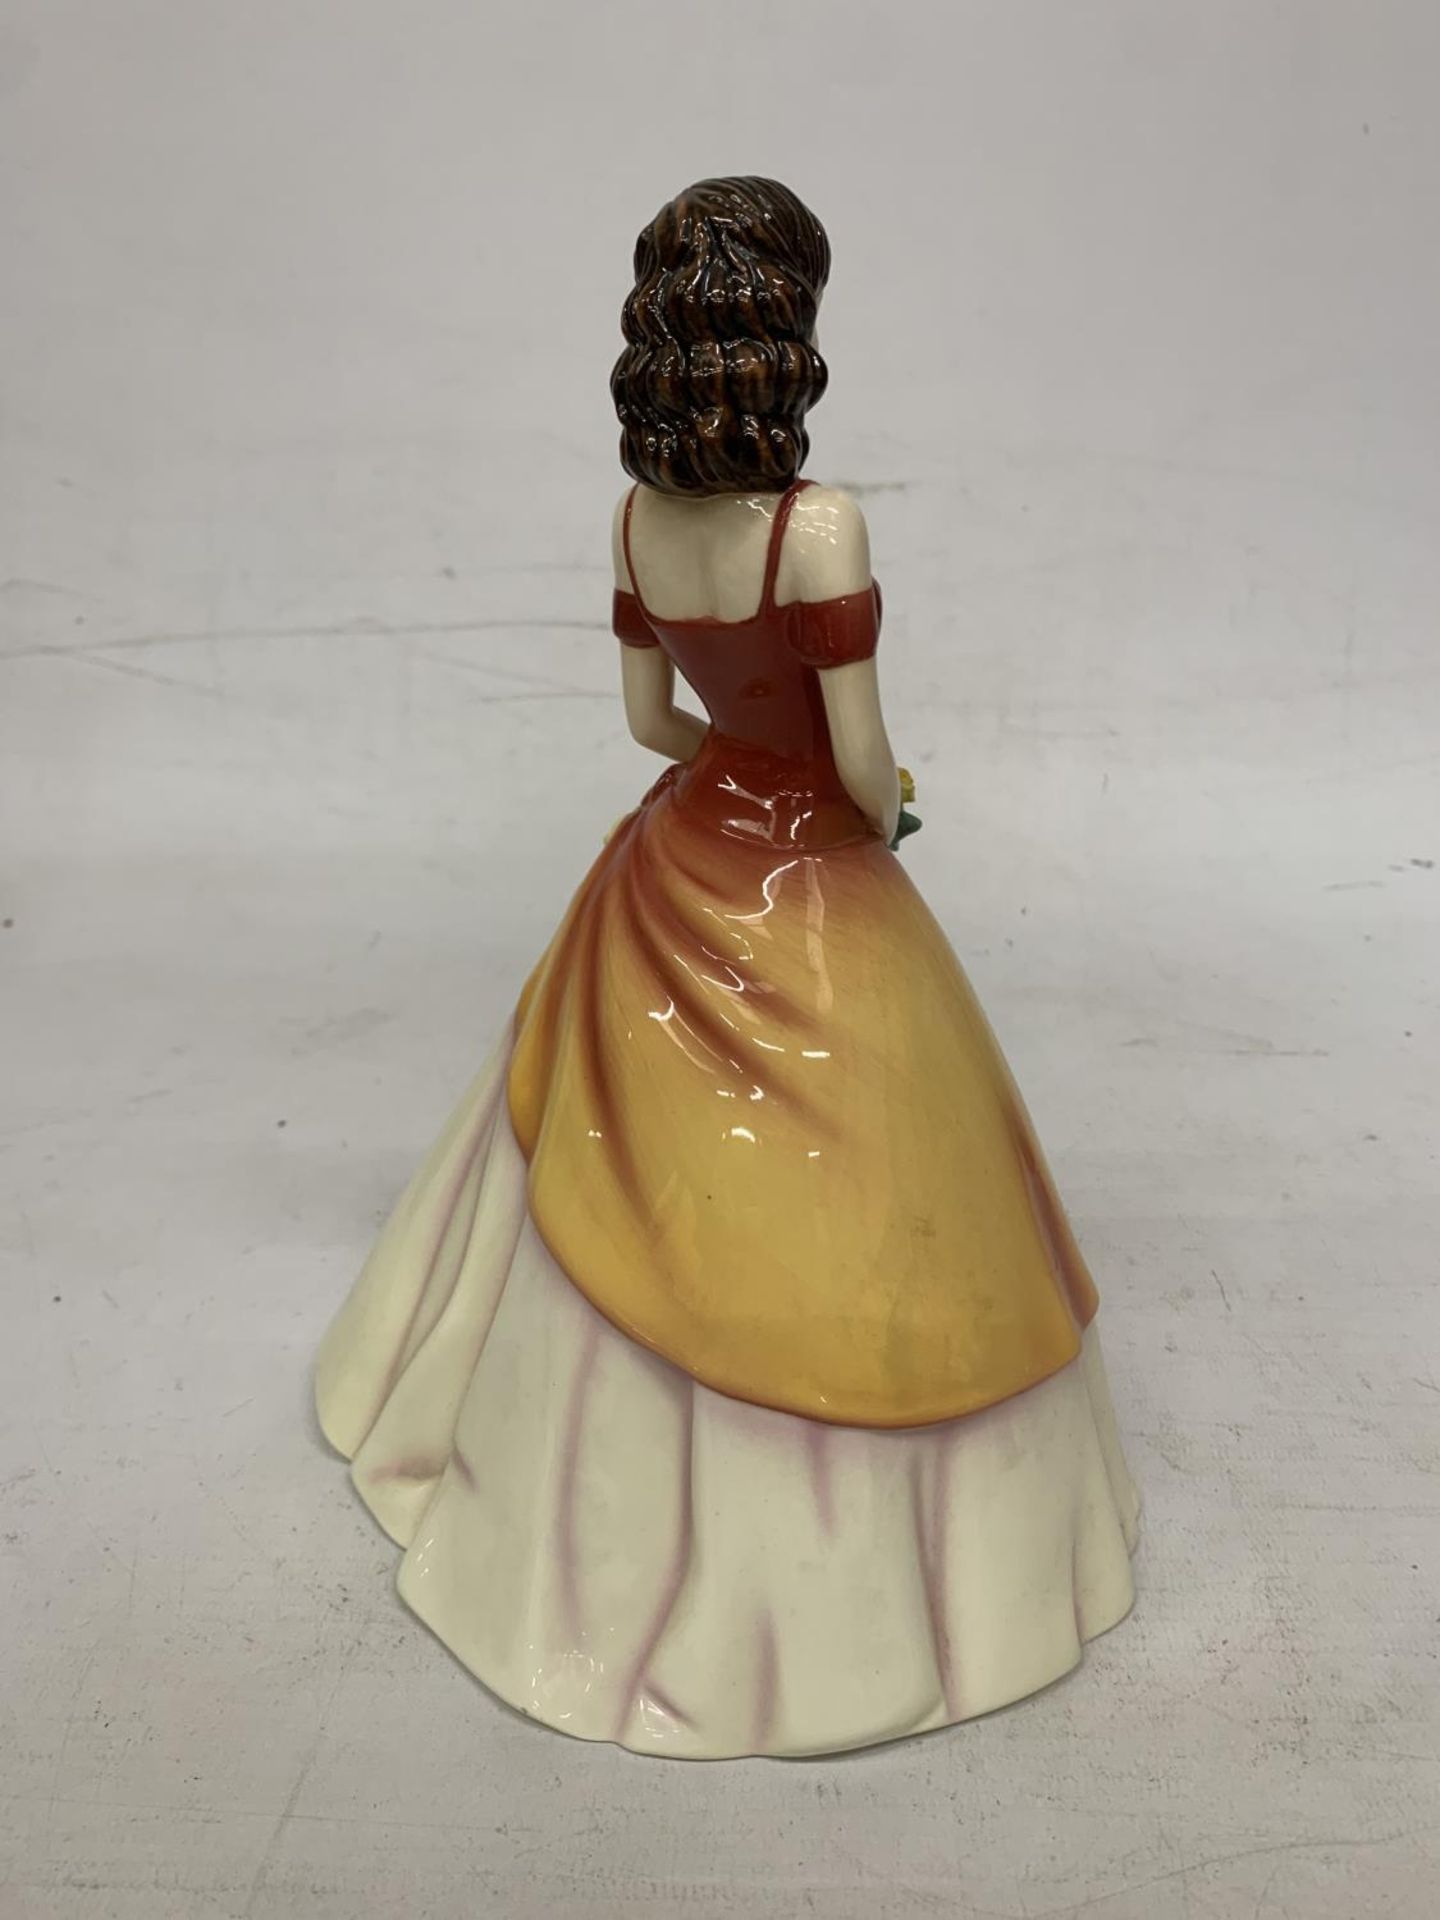 A BOXED ROYAL DOULTON FIGURE FROM THE PRETTY LADIES COLLECTION " LINDA" - Image 2 of 4